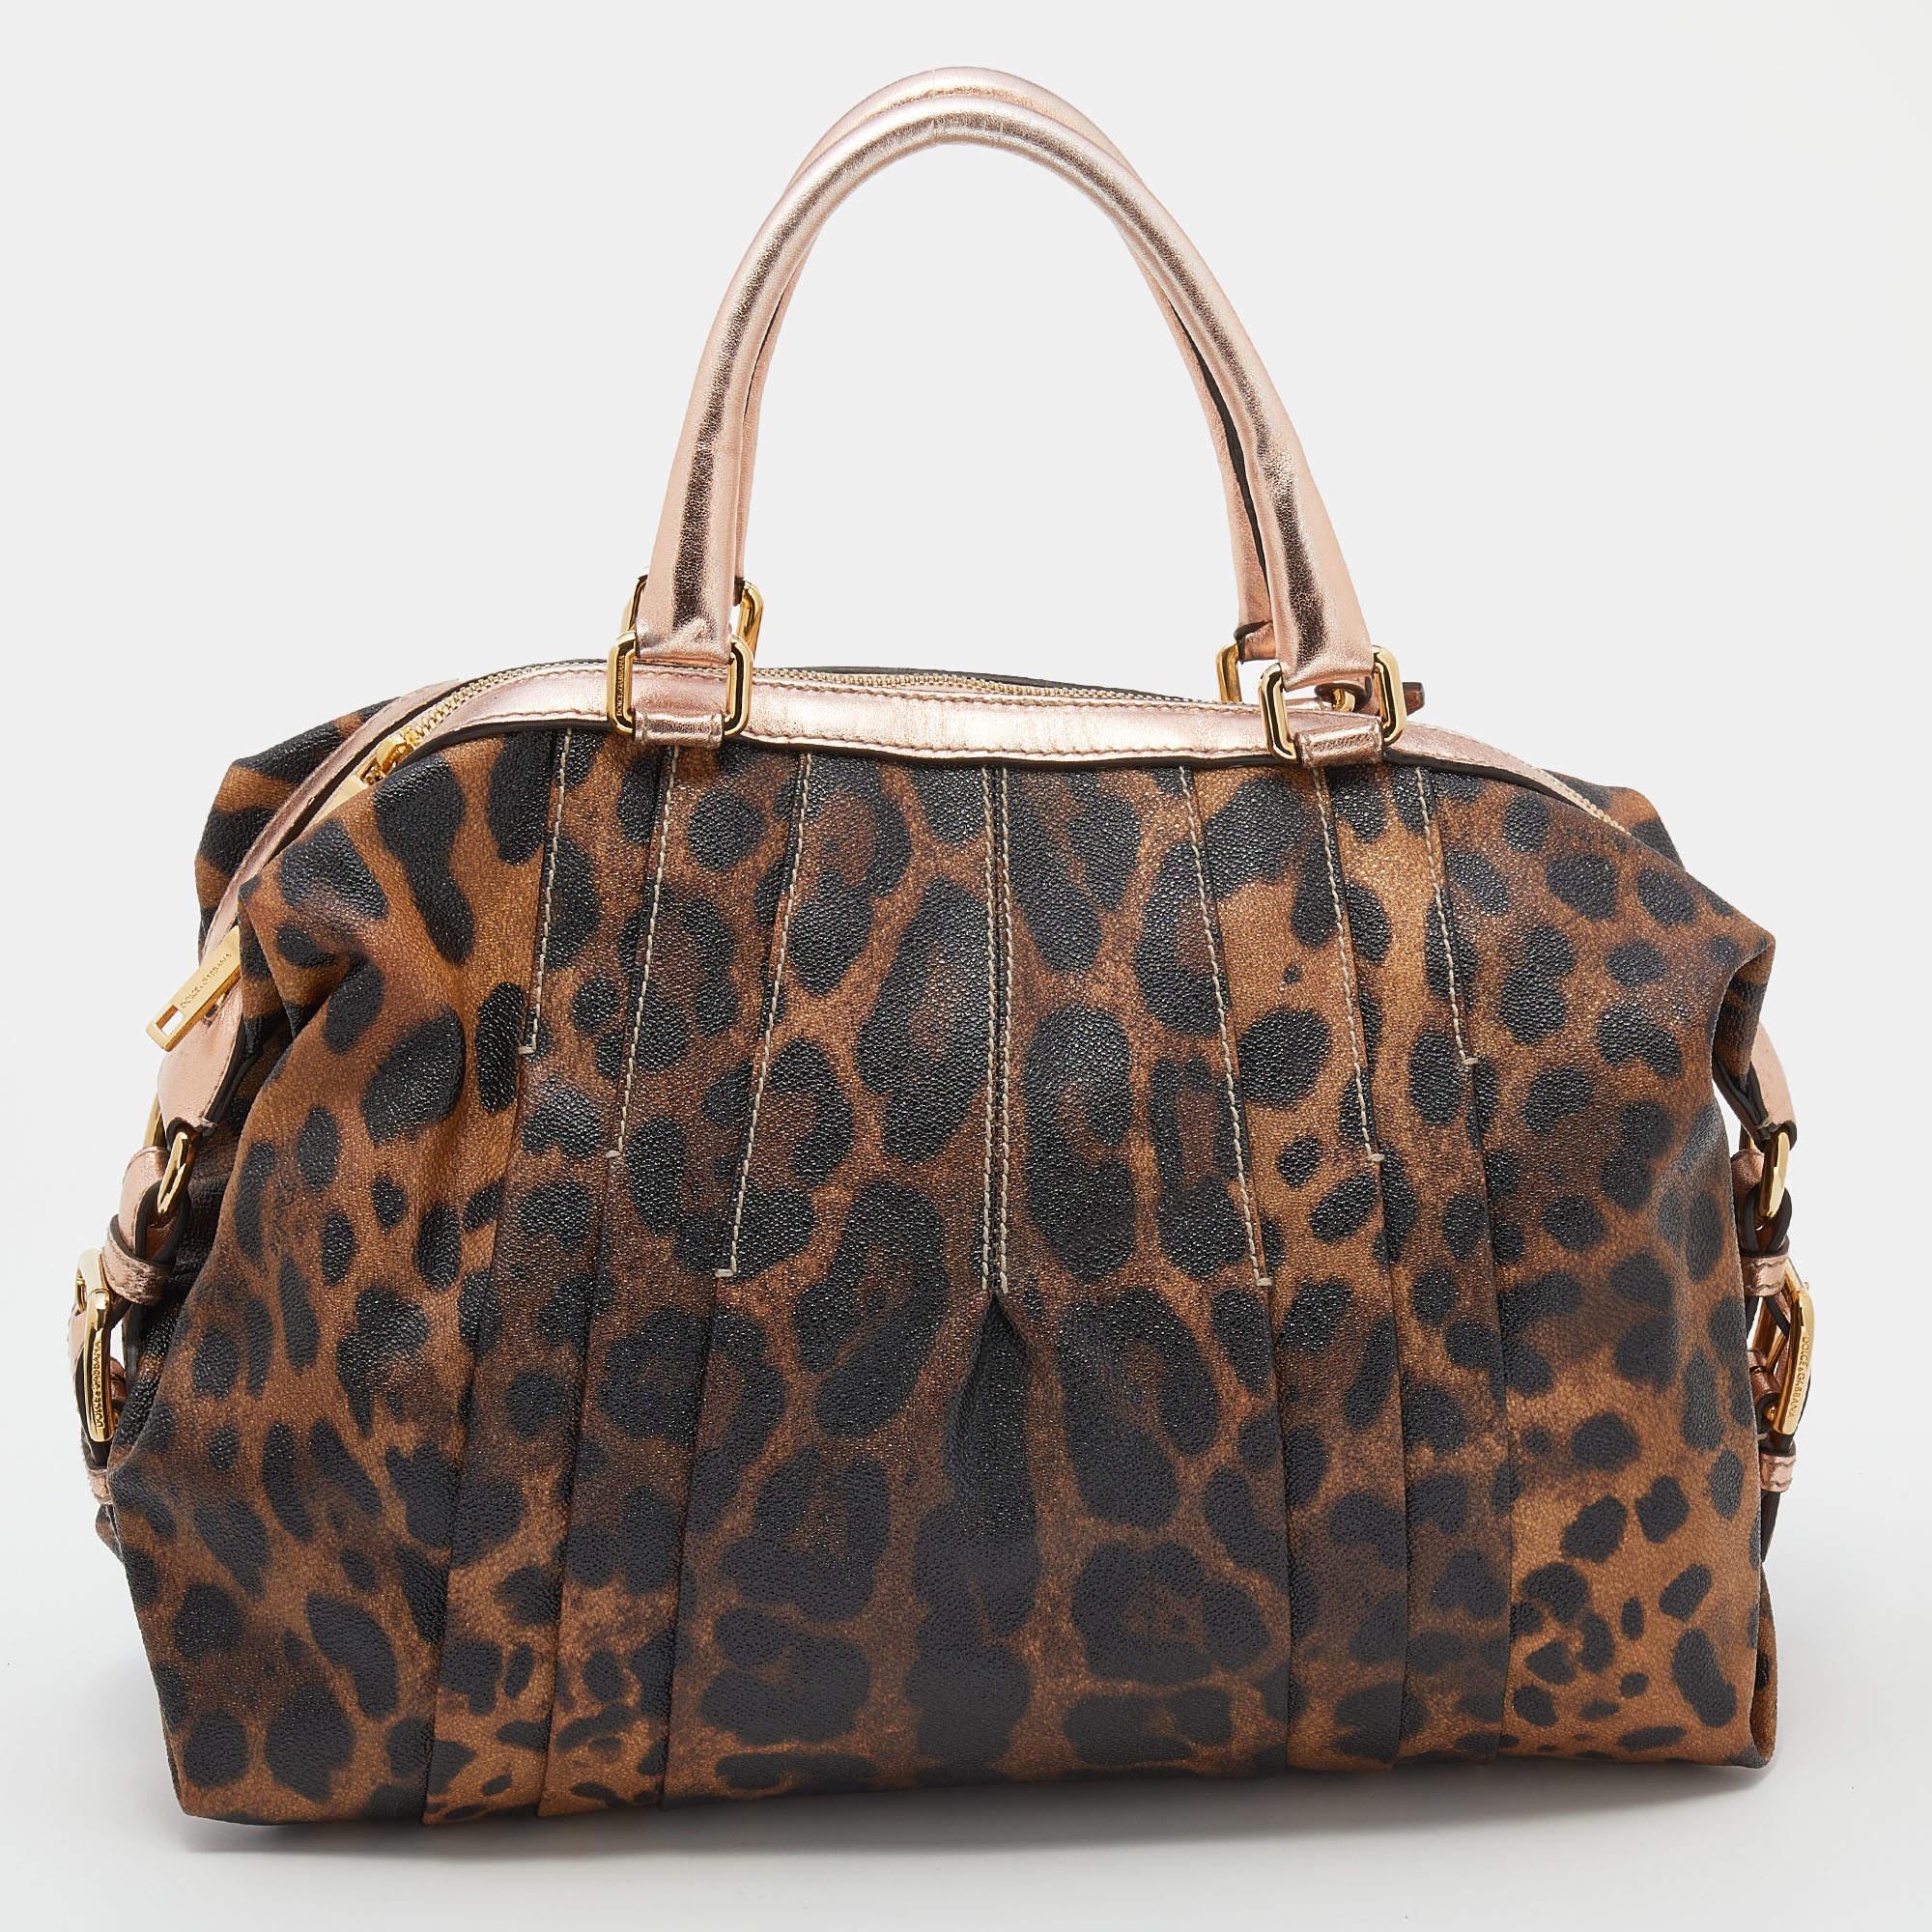 Dolce & Gabbana Brown/Rose Gold Leopard Print Coated Canvas and Leather Satchel In Good Condition For Sale In Dubai, Al Qouz 2